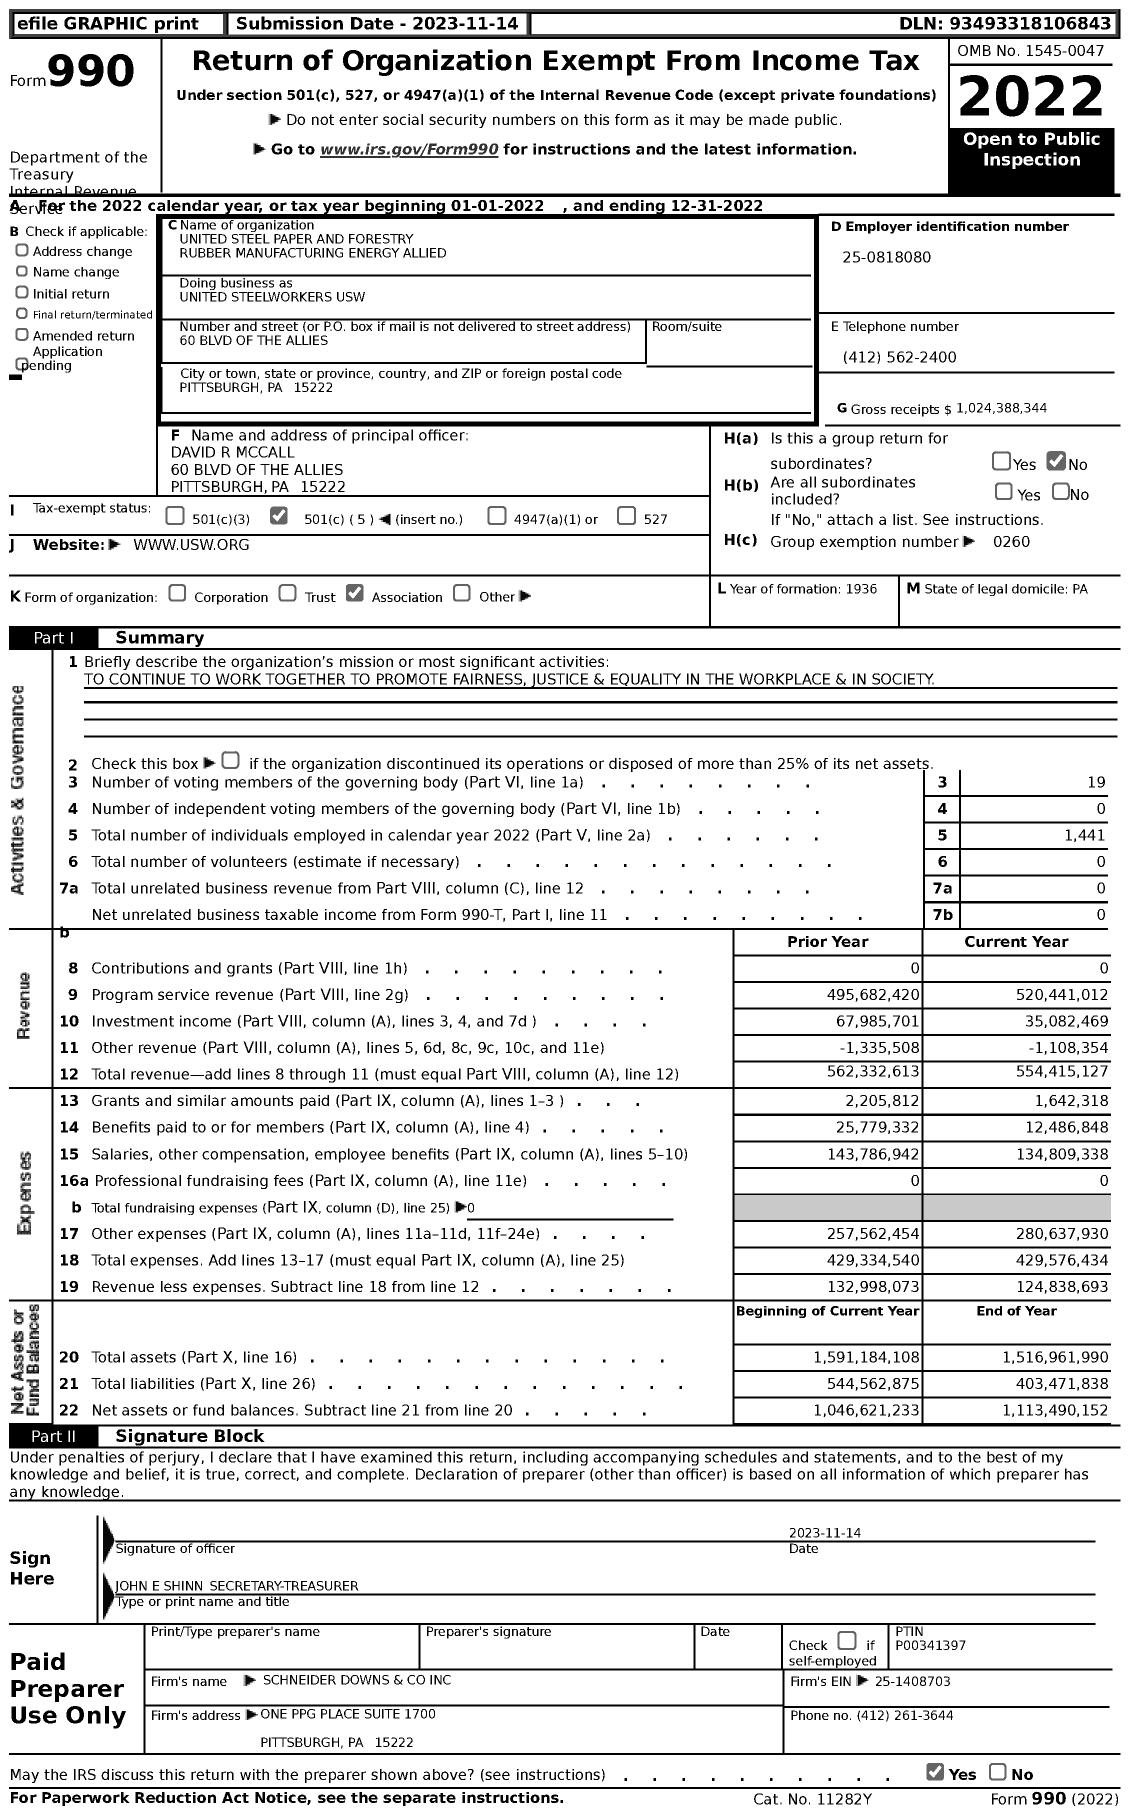 Image of first page of 2022 Form 990 for United Steelworkers USW